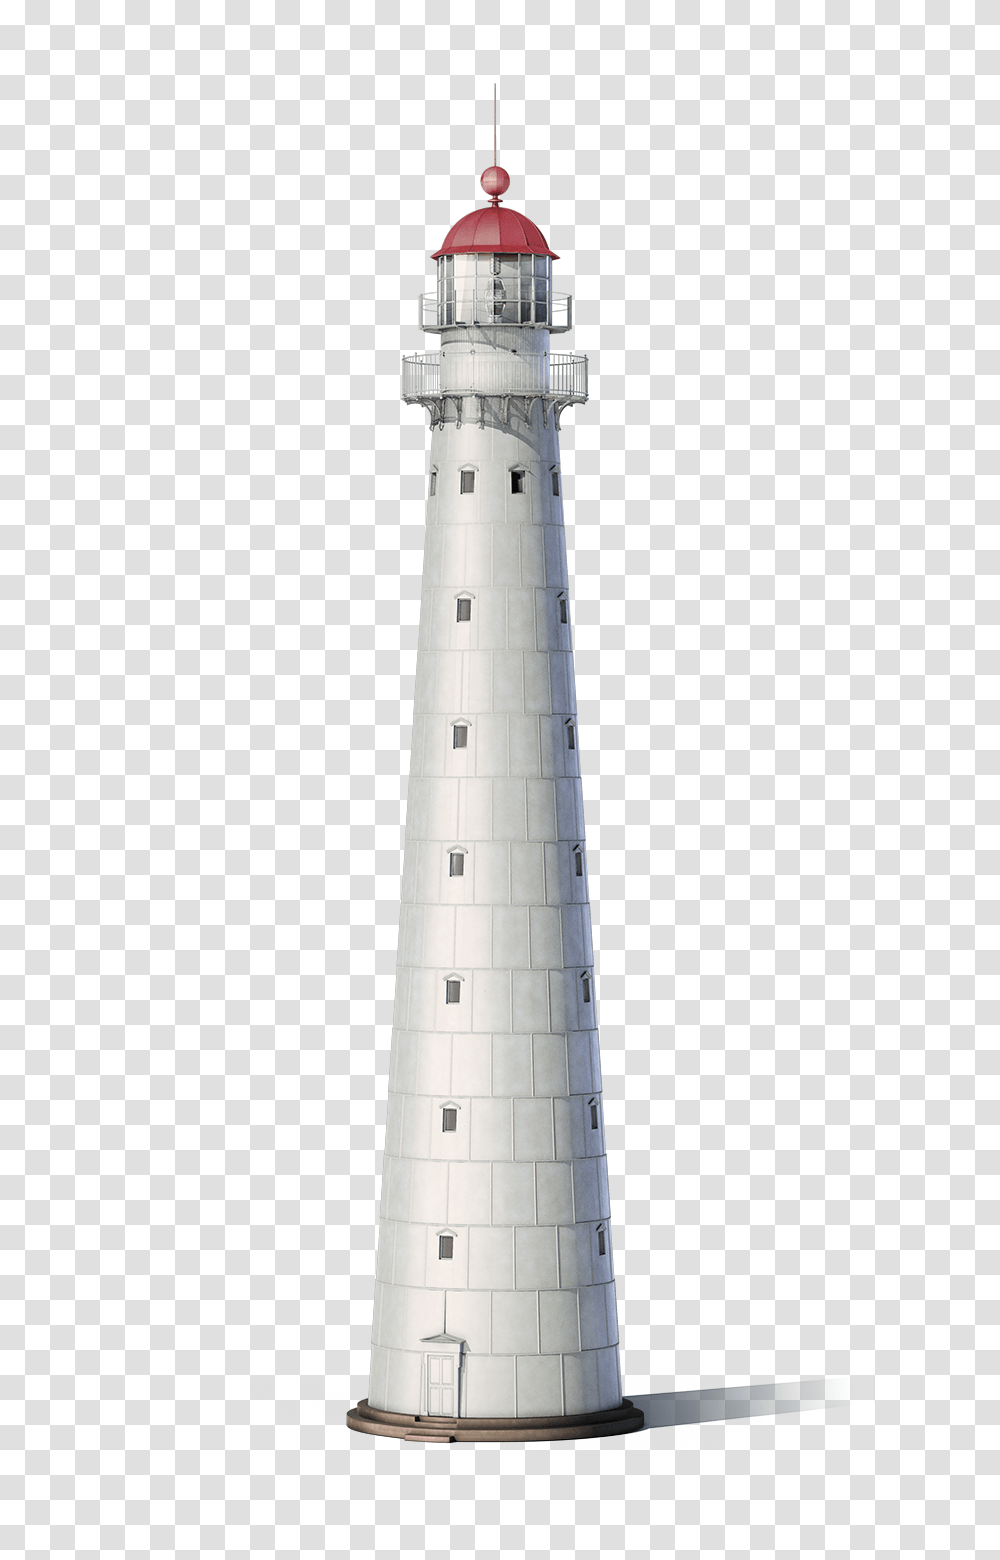 Lighthouse Image Lighthouse, Architecture, Building, Tower, Beacon Transparent Png